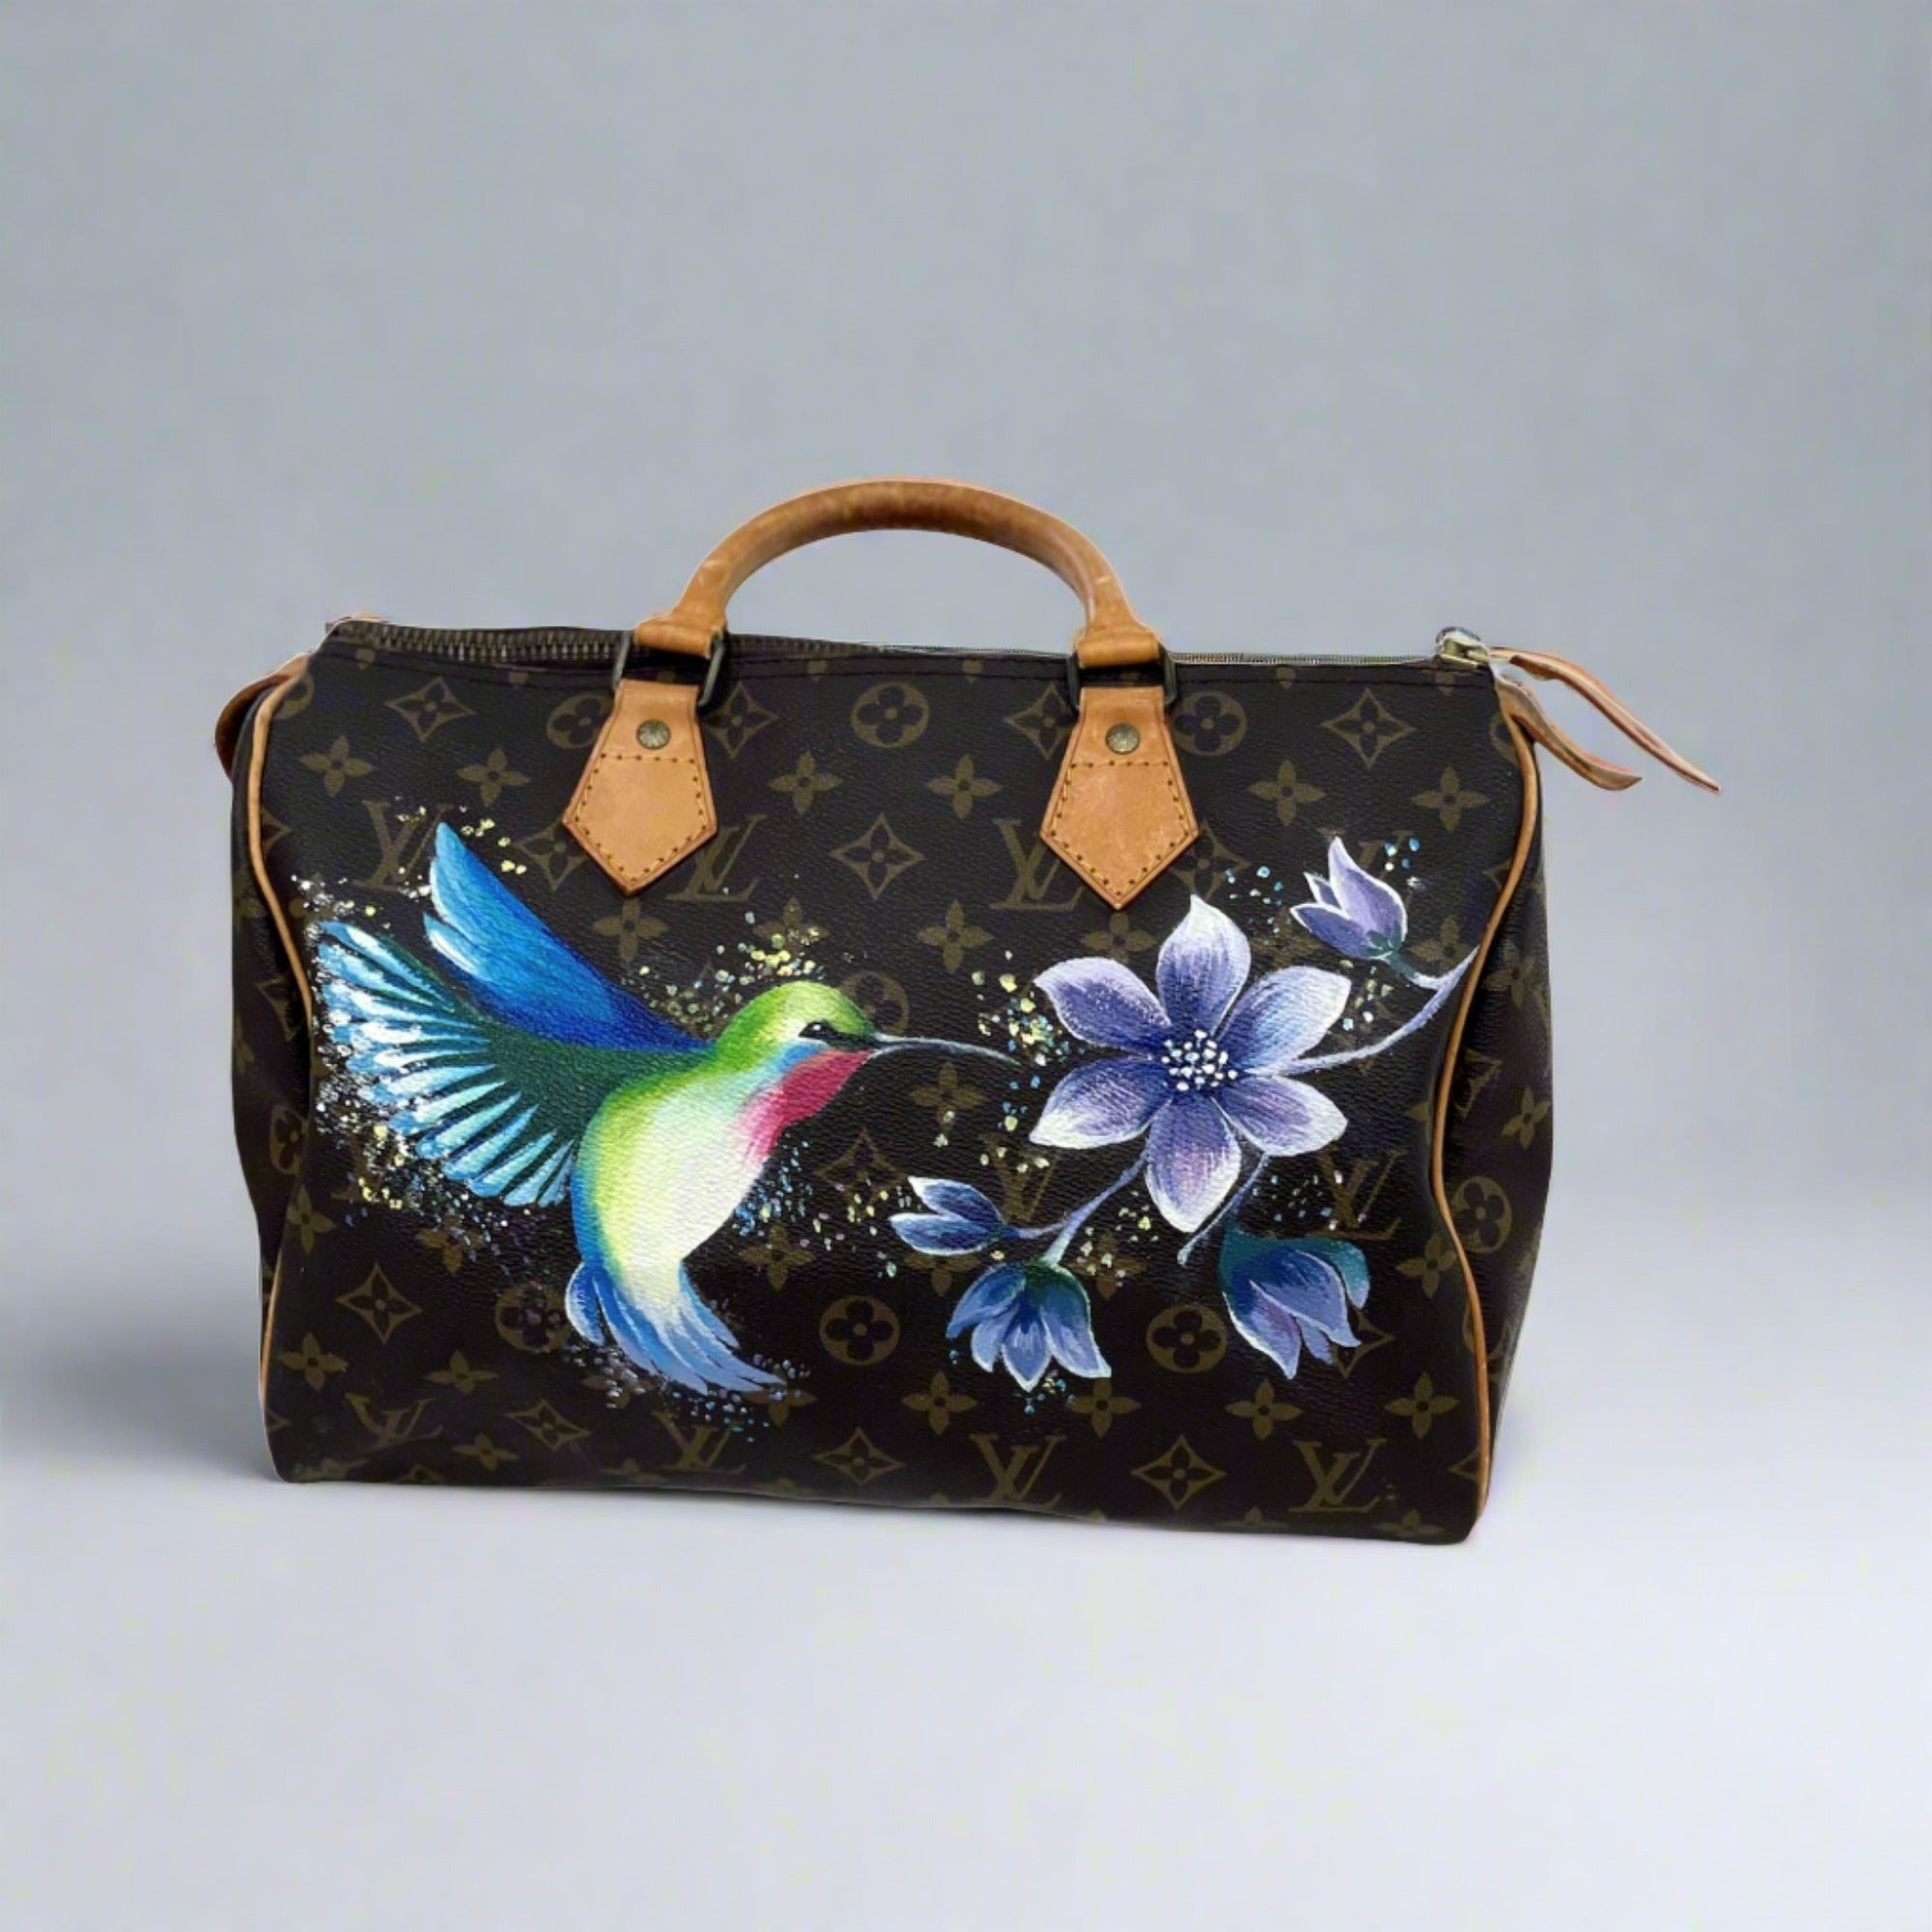 Personalized Louis Vuitton bag with exclusive hand-paint